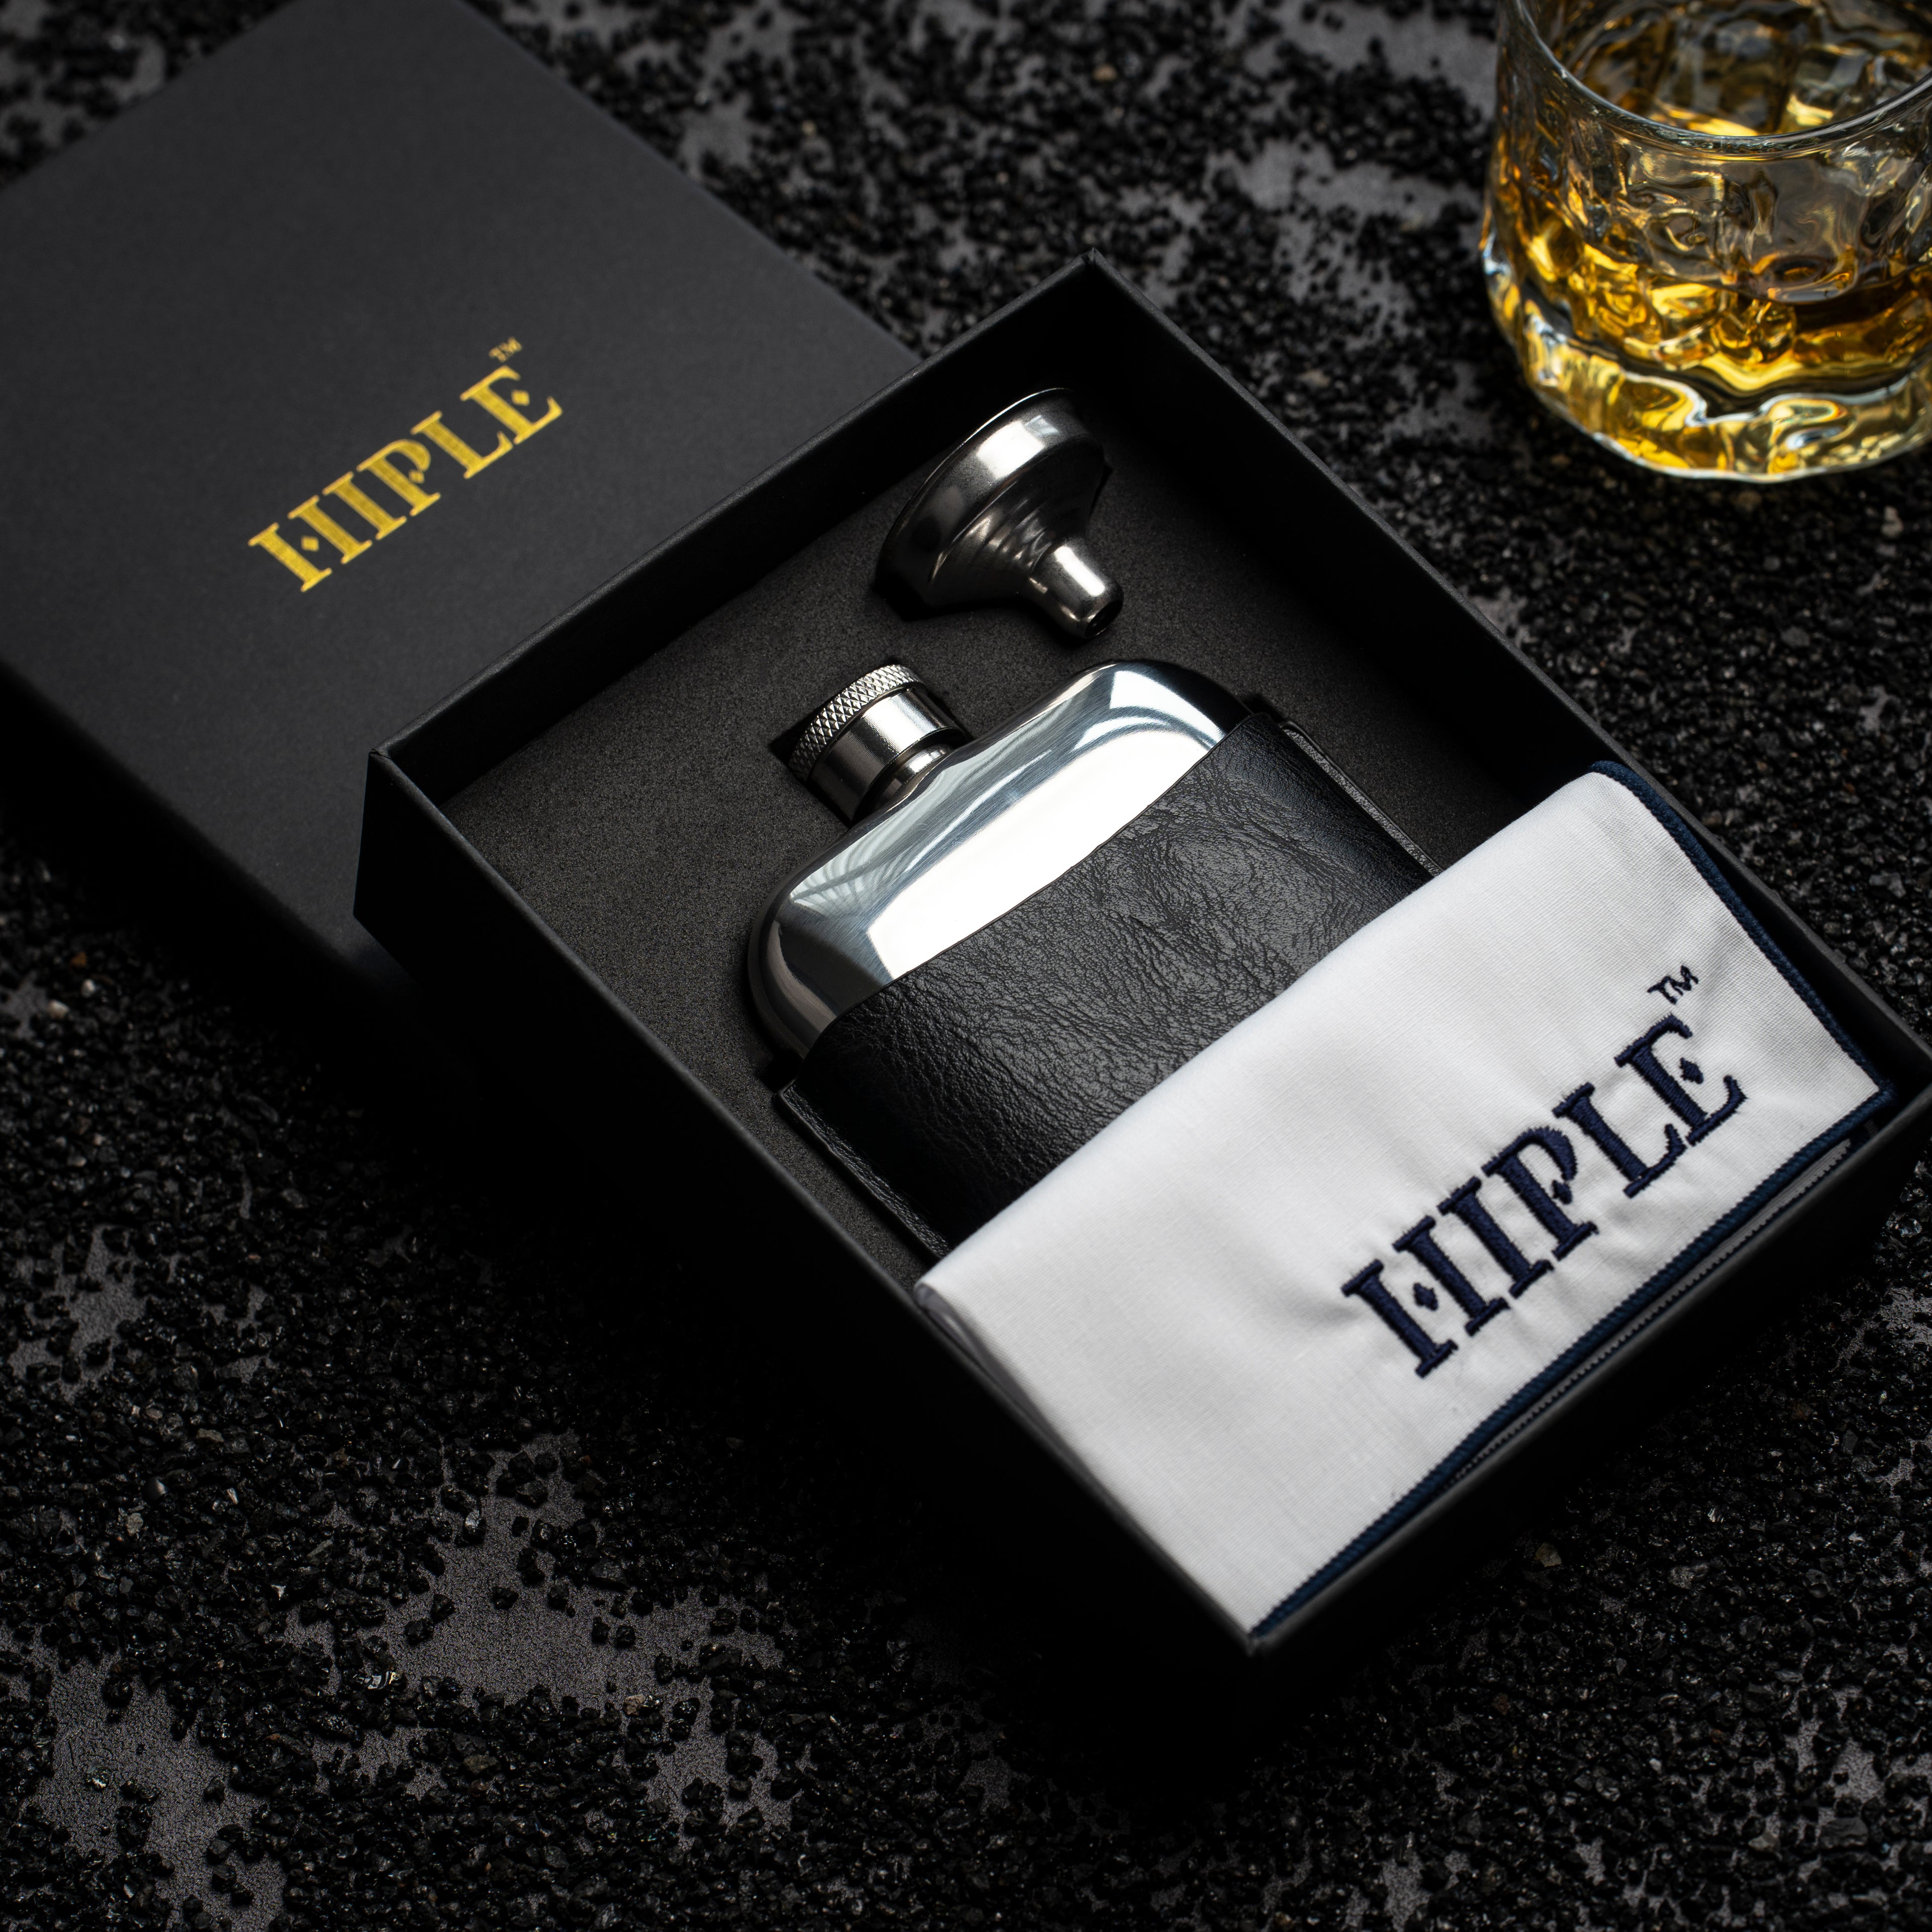 Hip Flask Gift Black leather sleeve silver hip flask whiskey Flask Black box Cotton handkerchief Stainless steel flask